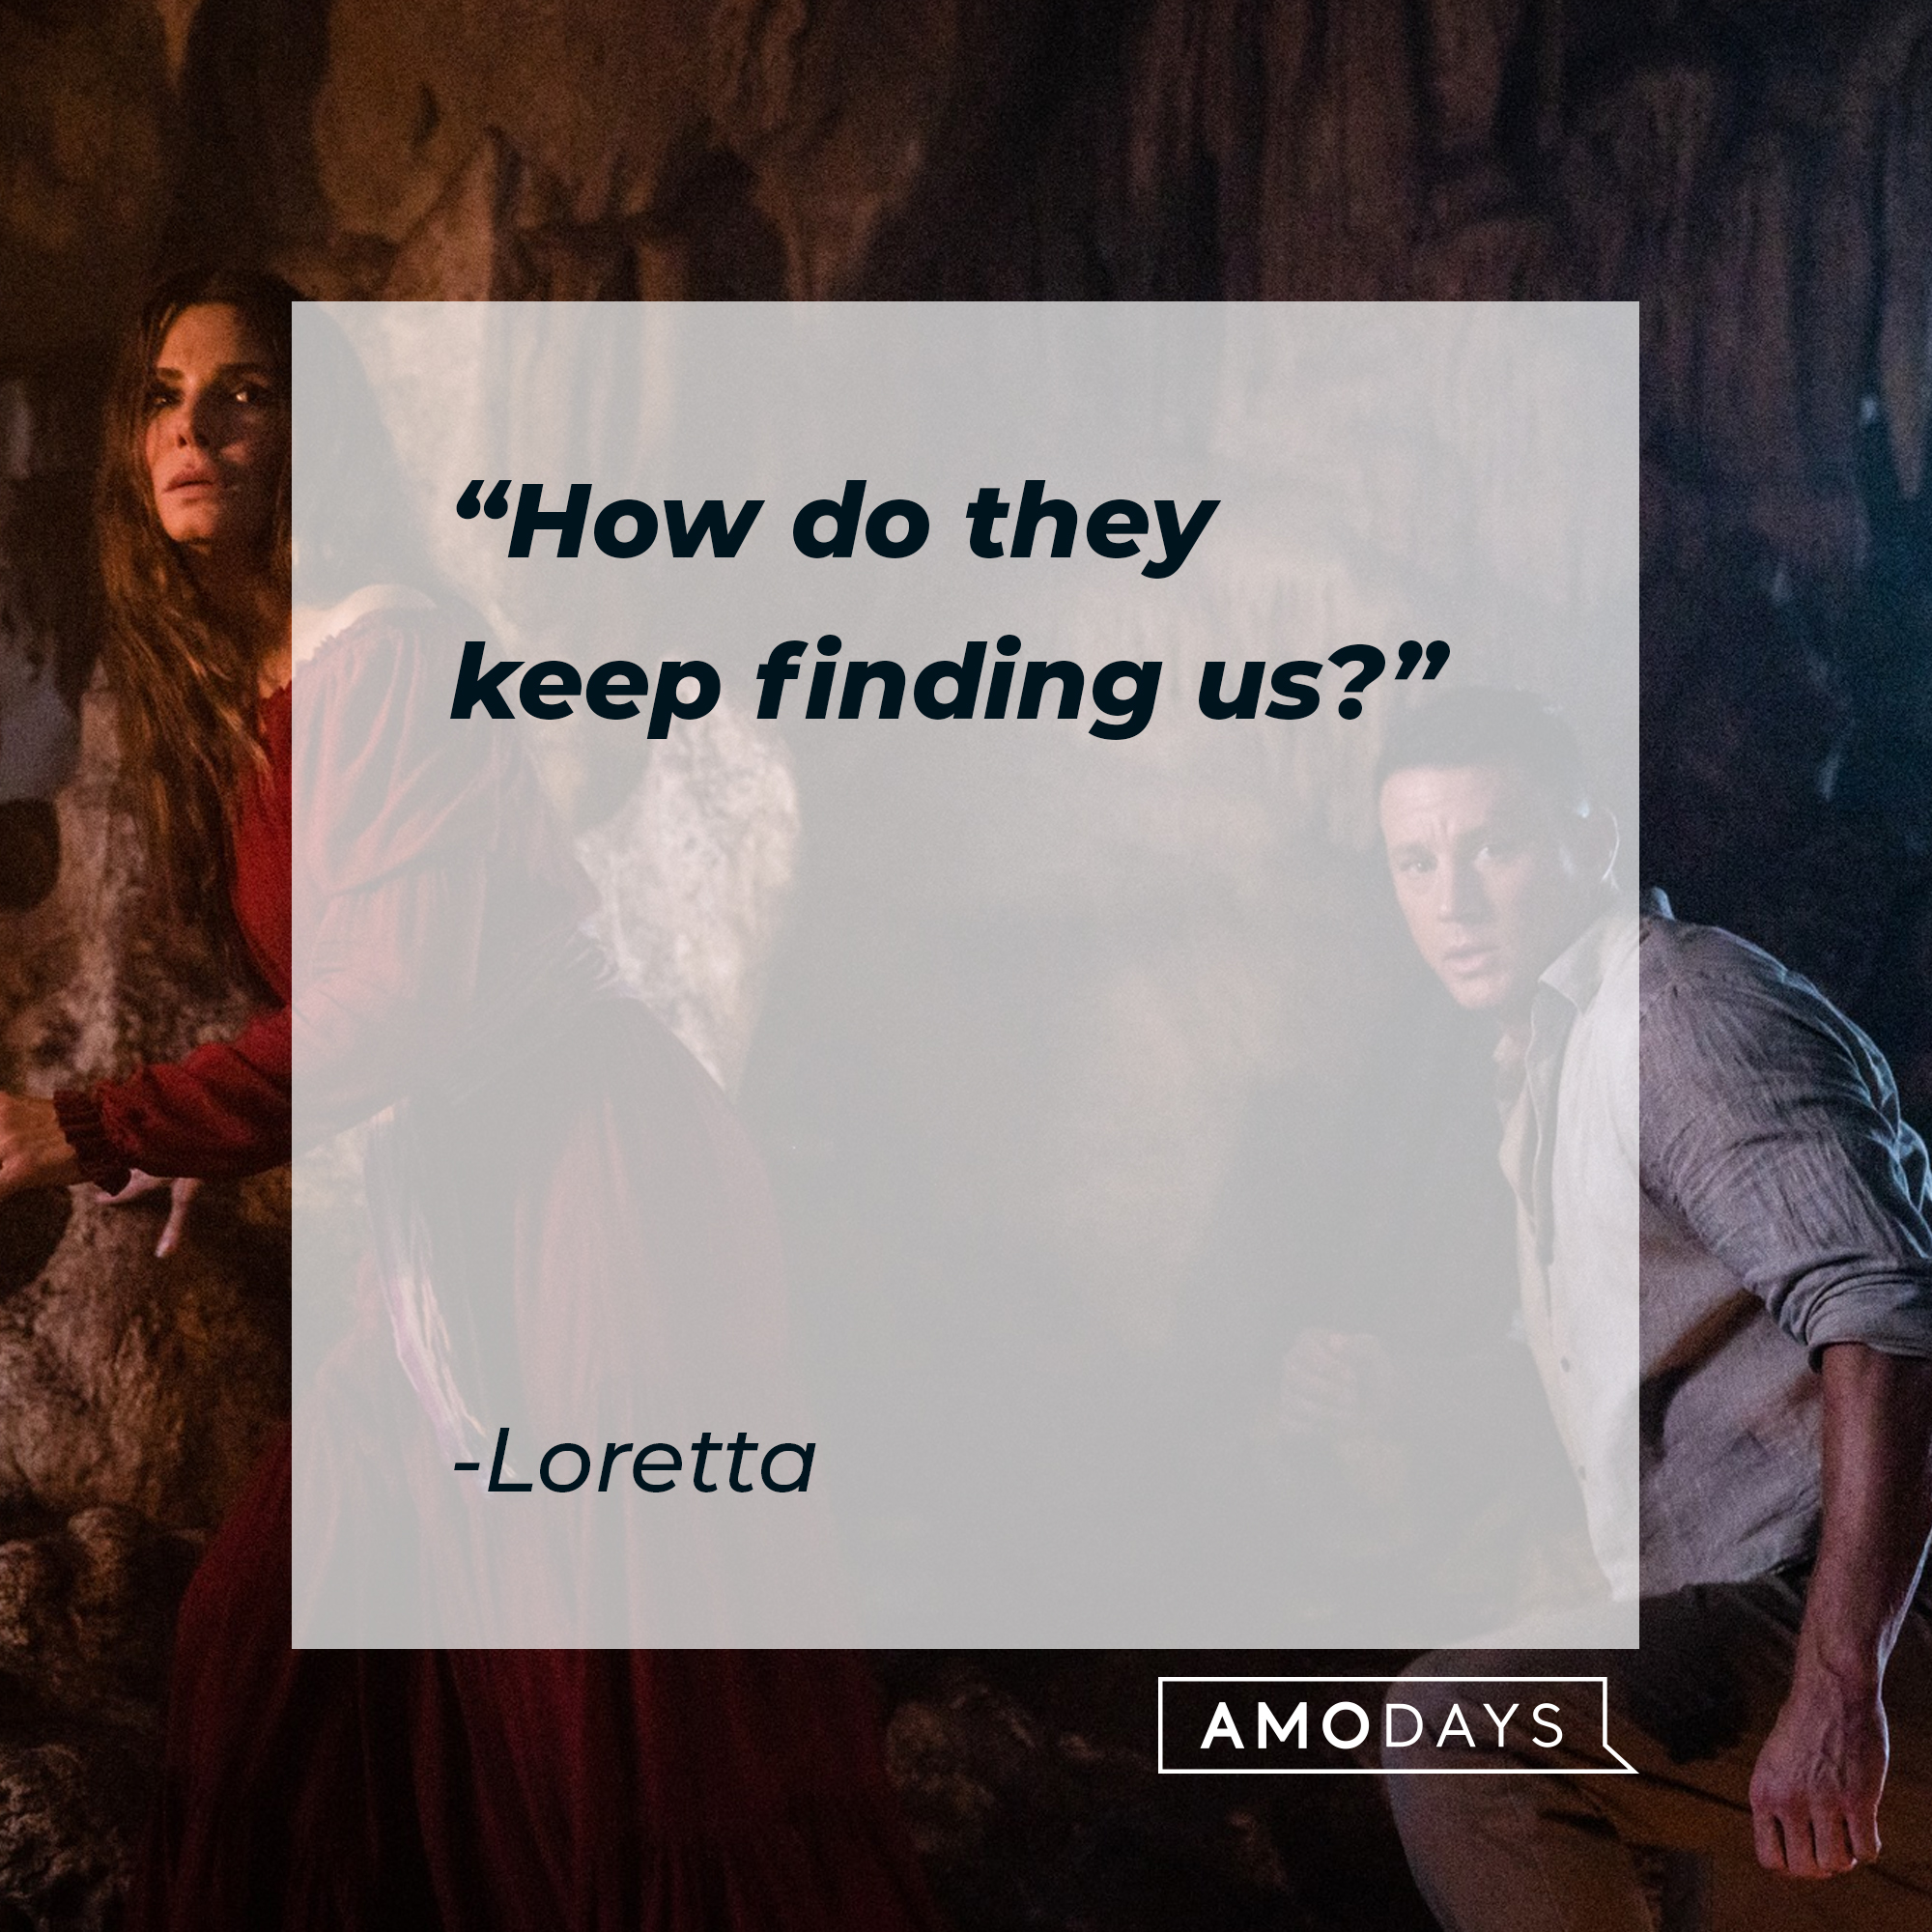 Loretta with her quote: "How do they keep finding us?" | Source: facebook.com/TheLostCityMovie